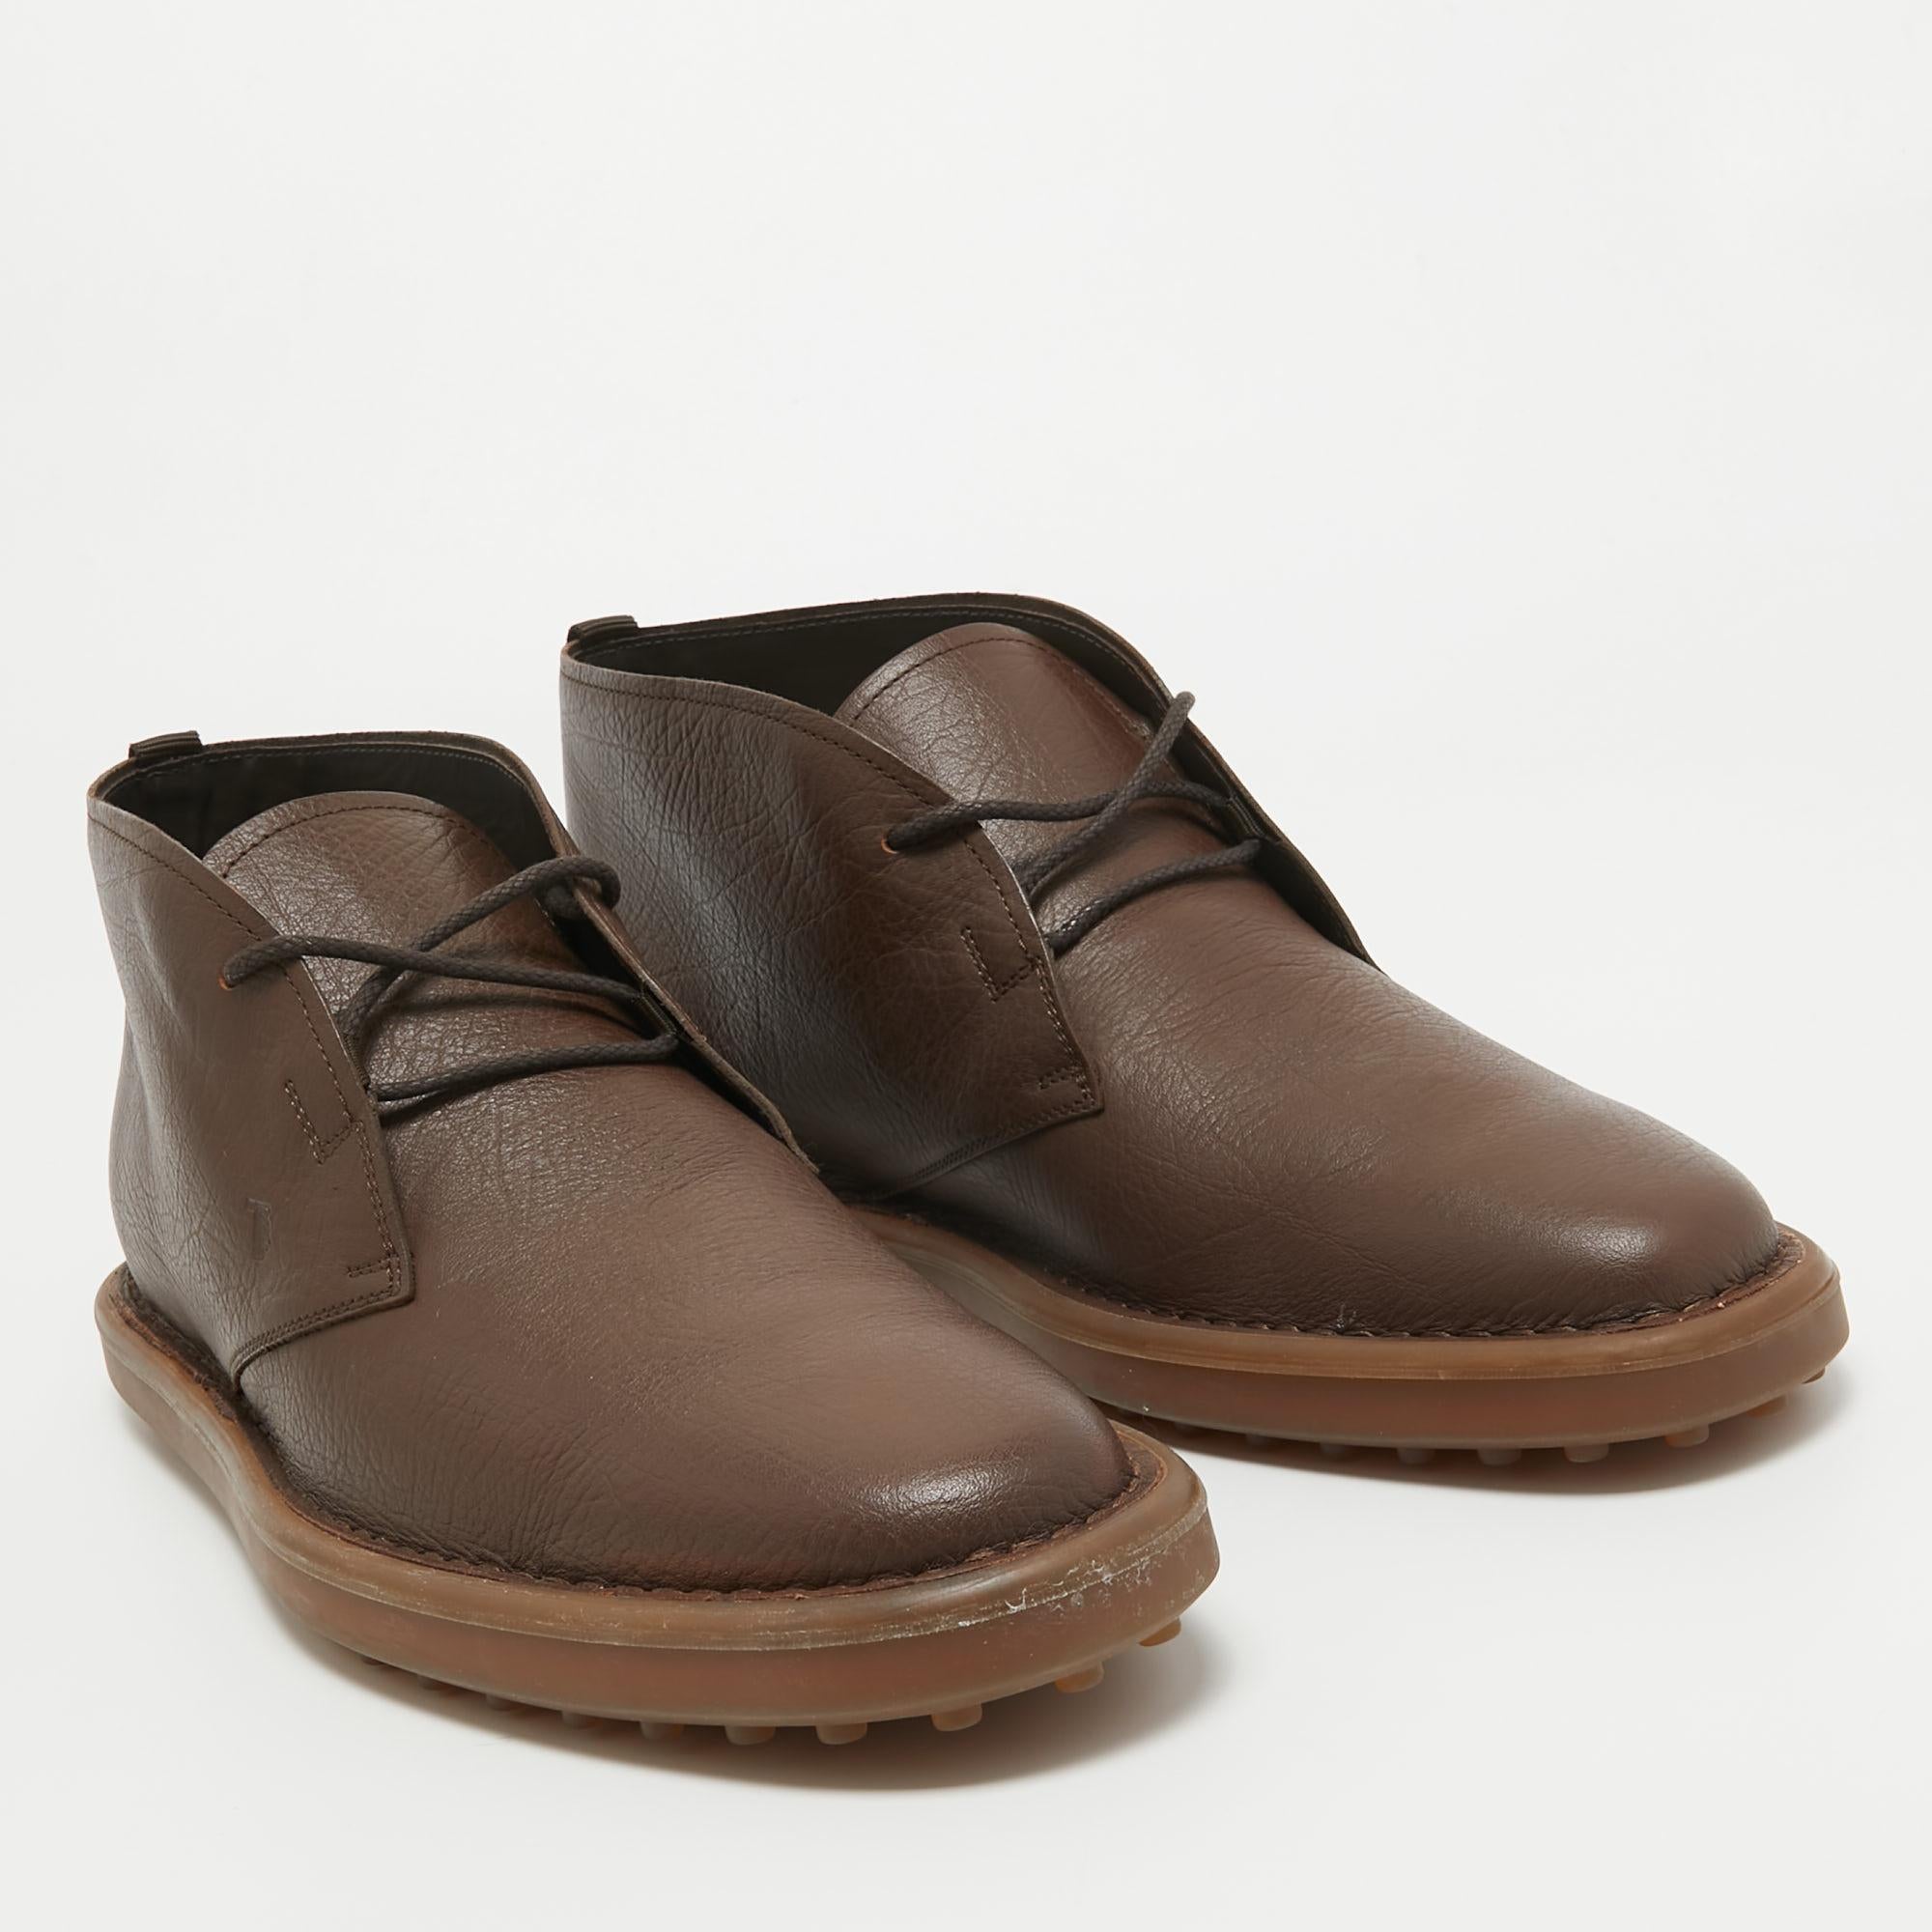 Elevate your style with these Tod's boots for men. Crafted with precision, these versatile boots seamlessly blend fashion and comfort, offering sophistication for every season.

Includes: Original Dustbag, Original Box, Info Booklet